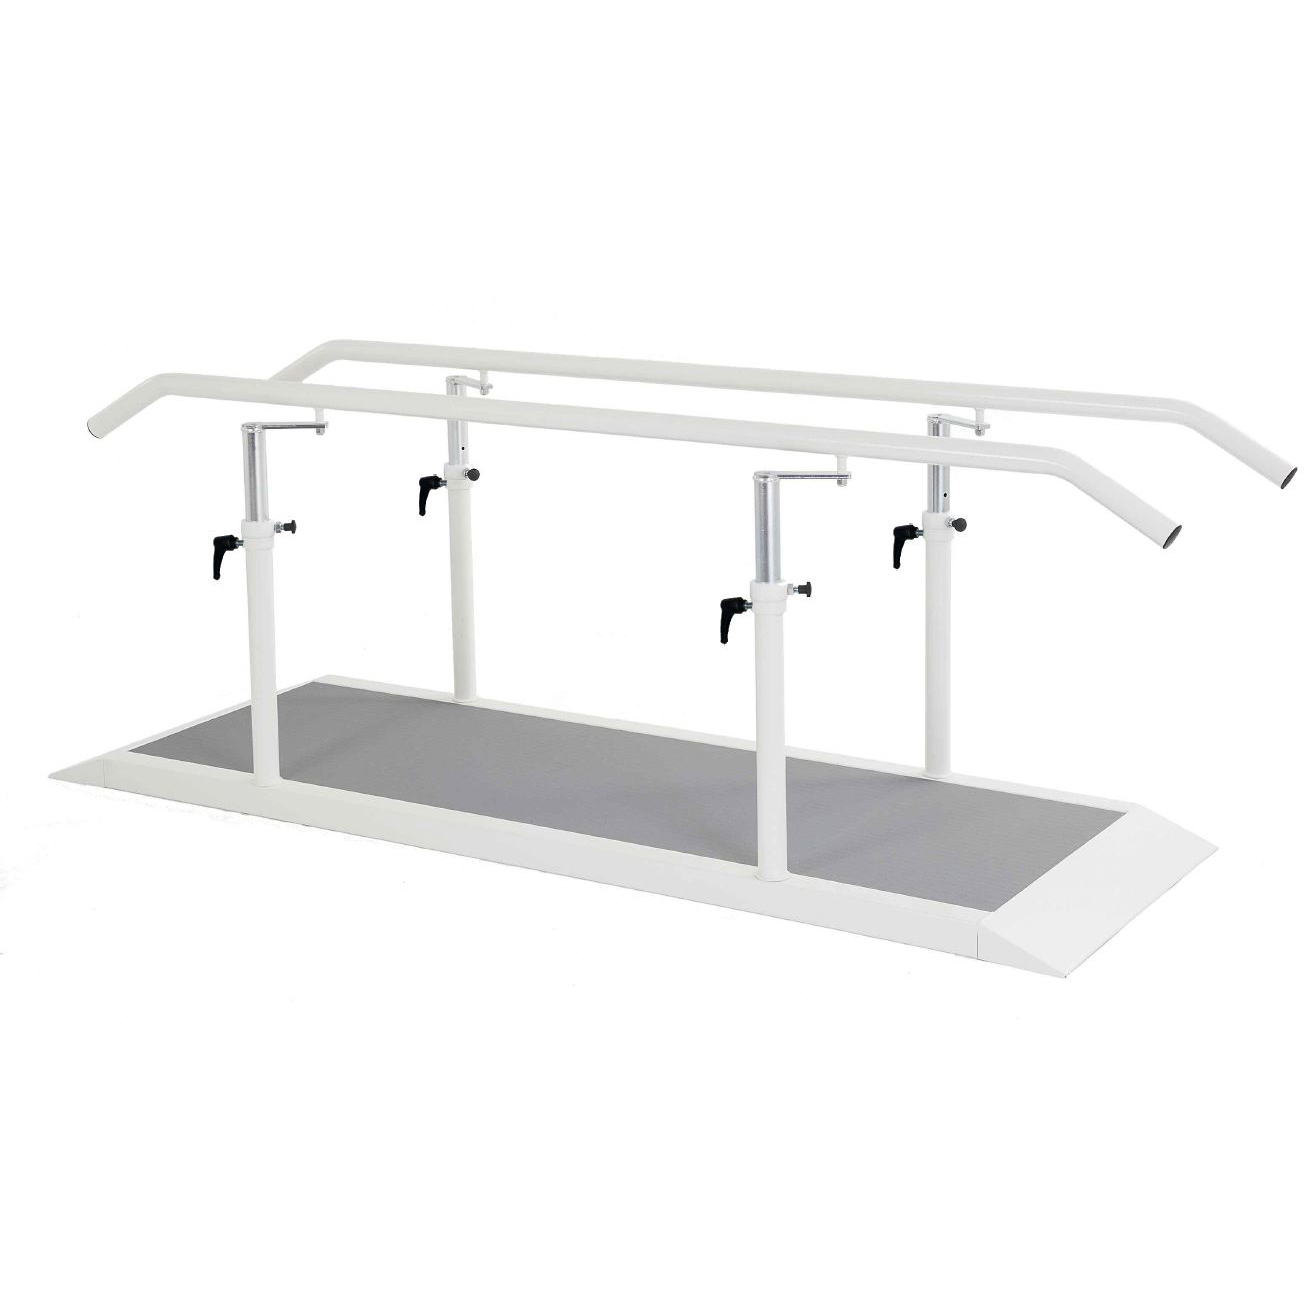 2 metres parallel bars with metal handrail